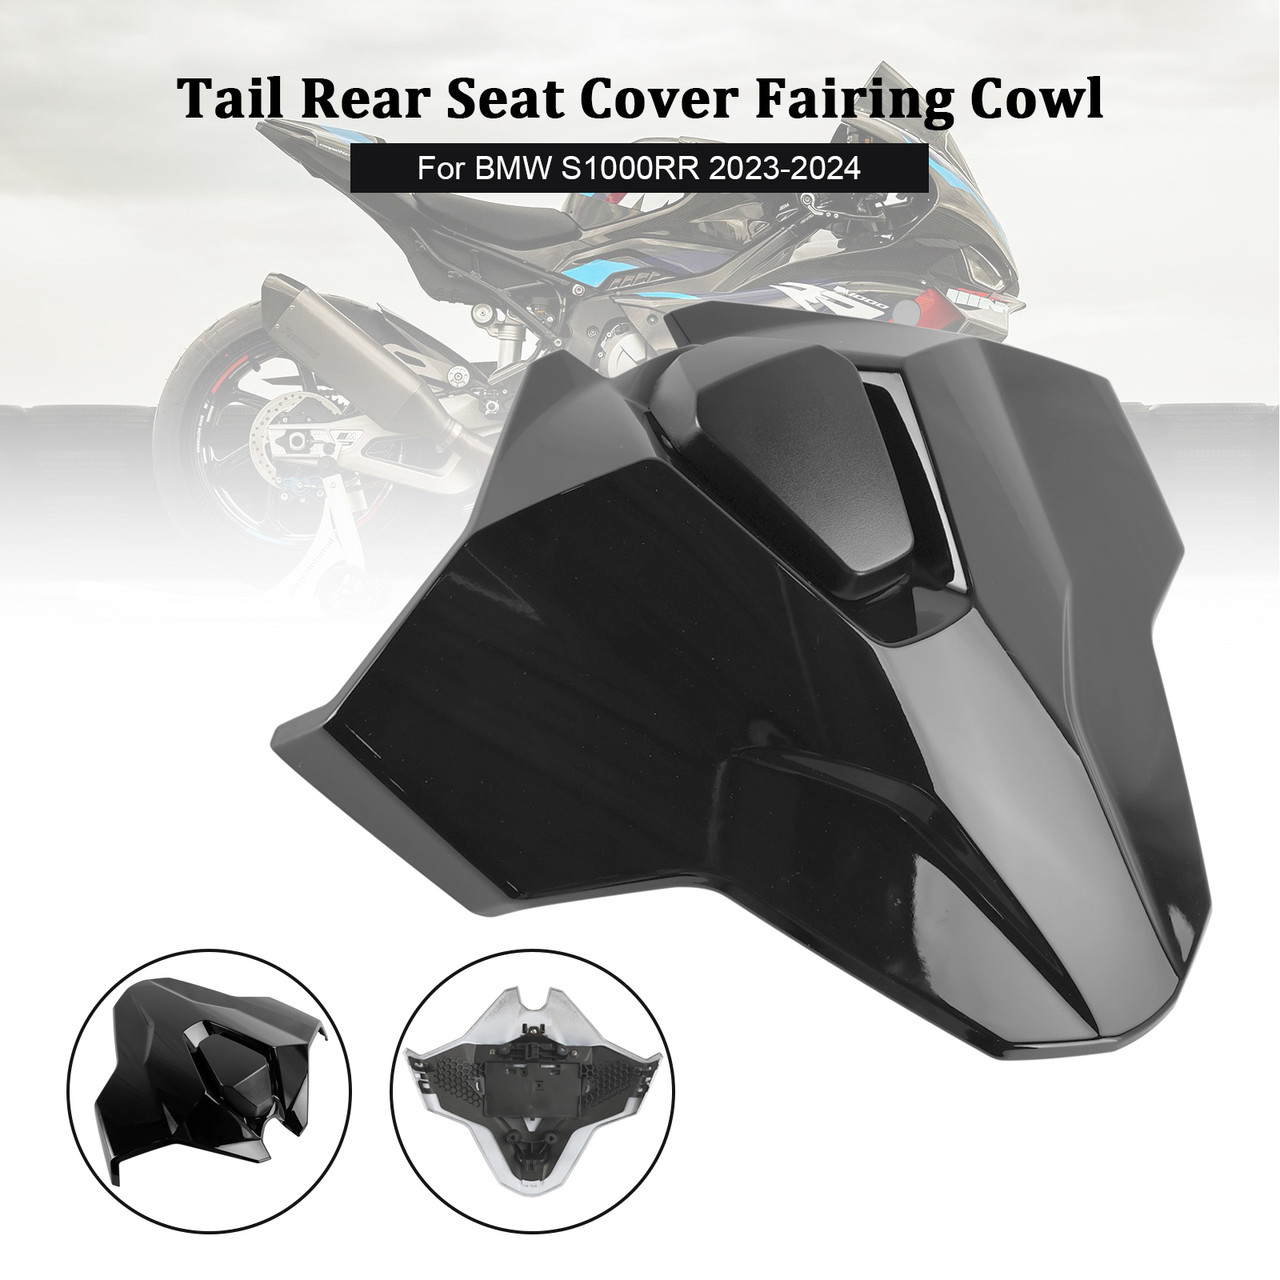 2023-2024 BMW S1000RR Tail Rear Seat Cover Fairing Cowl black Generic